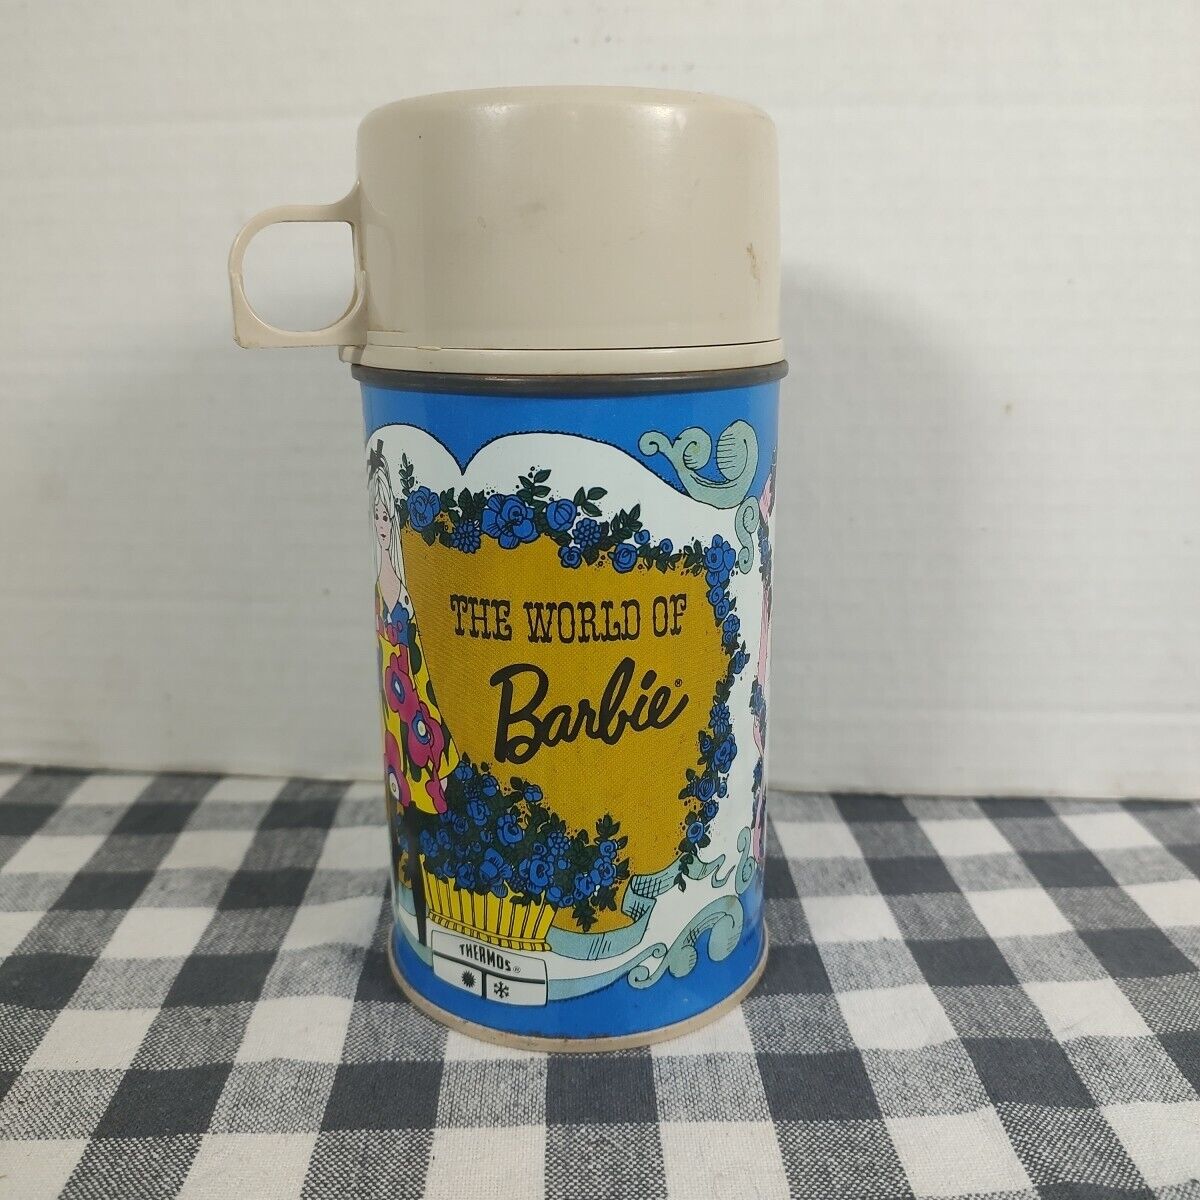 Vintage 1971 The World Of Barbie Thermos With Stopper and Lid Metal Half Pint